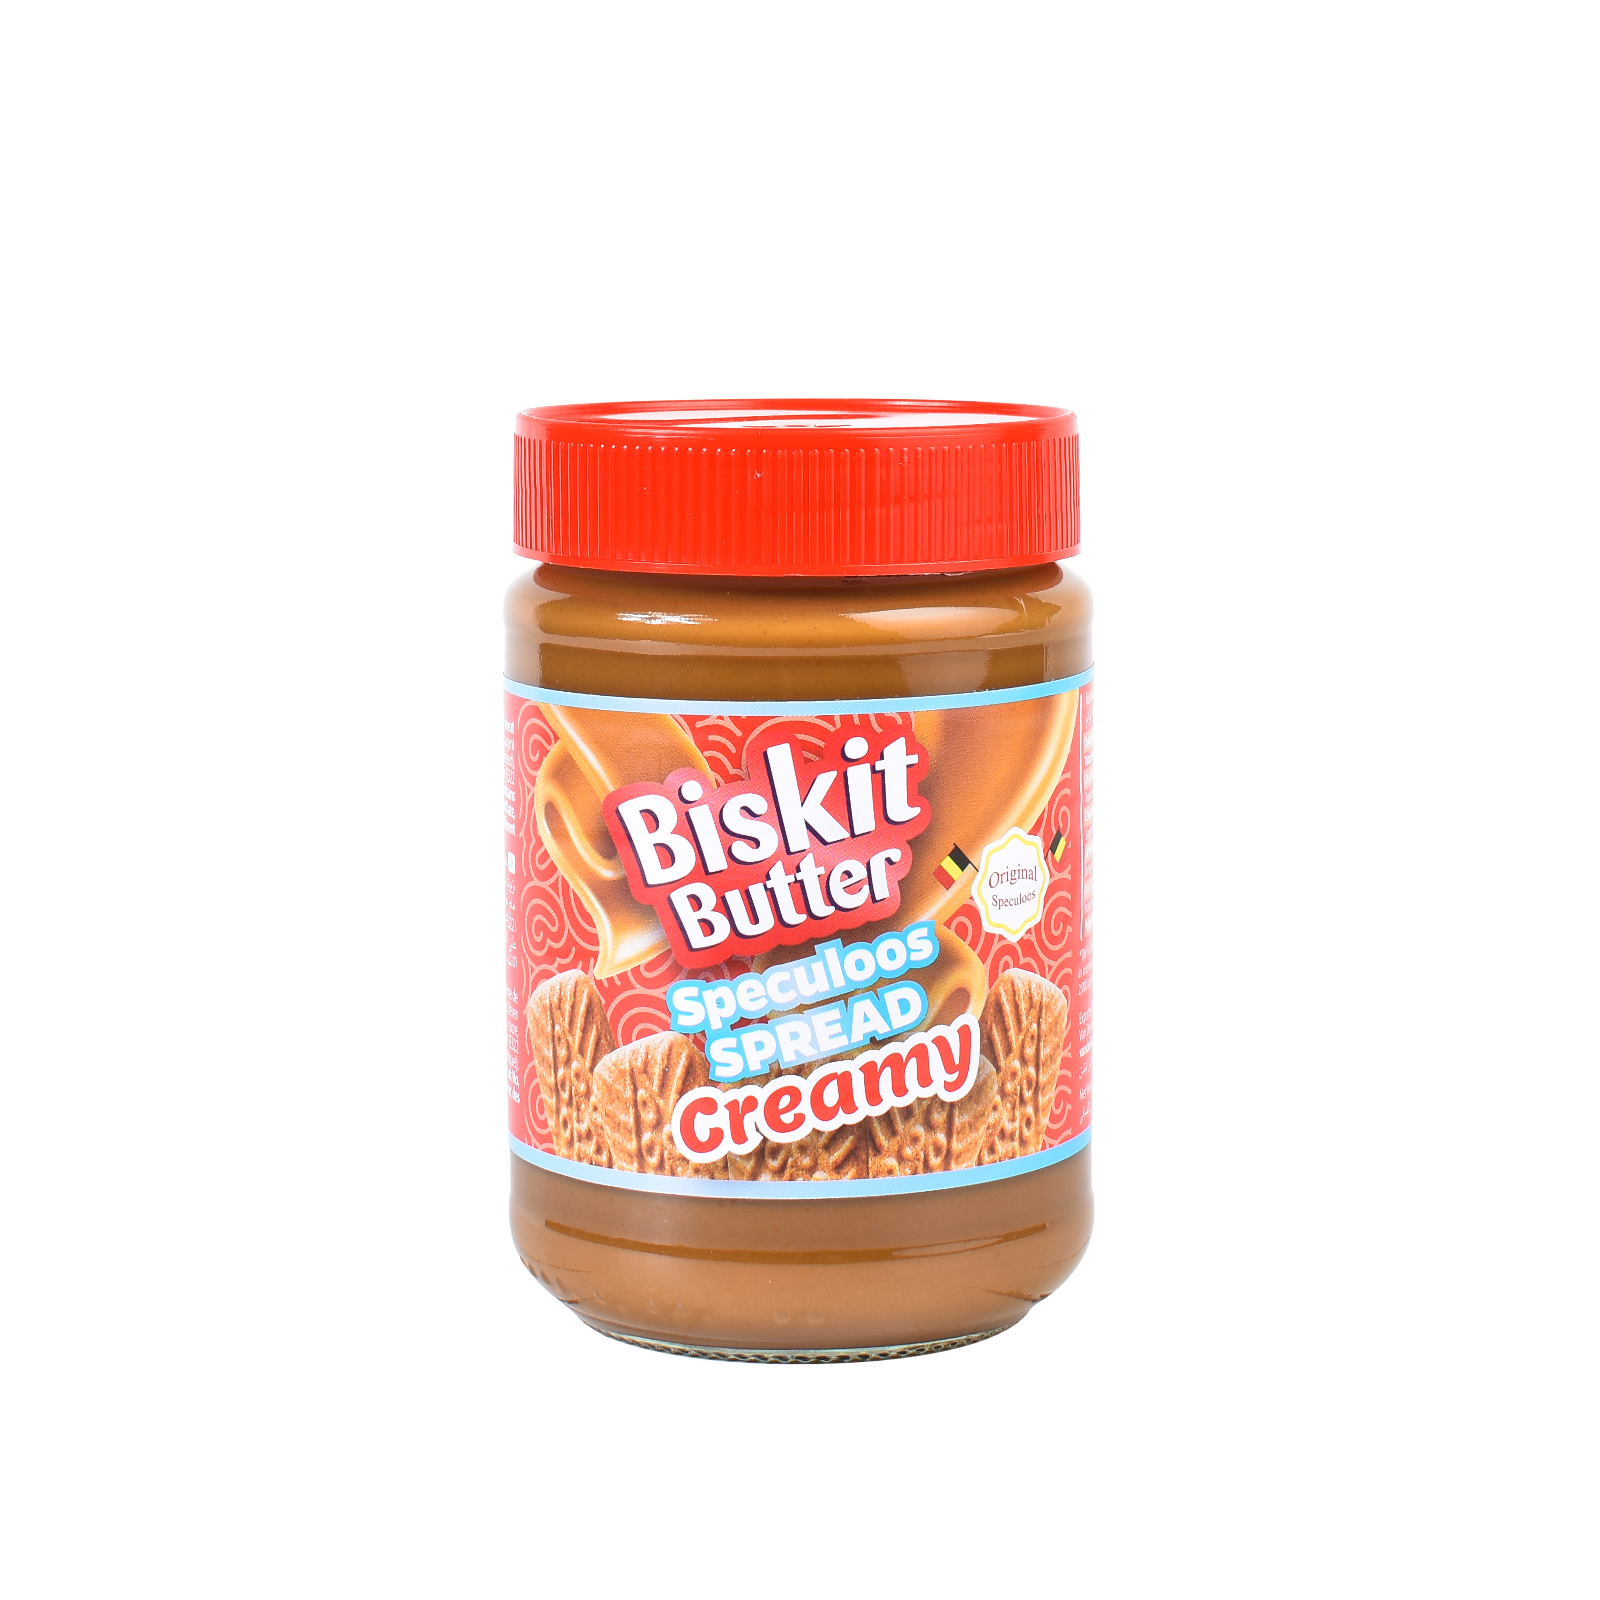 Biskit Butter Speculoos Spread Creamy.png